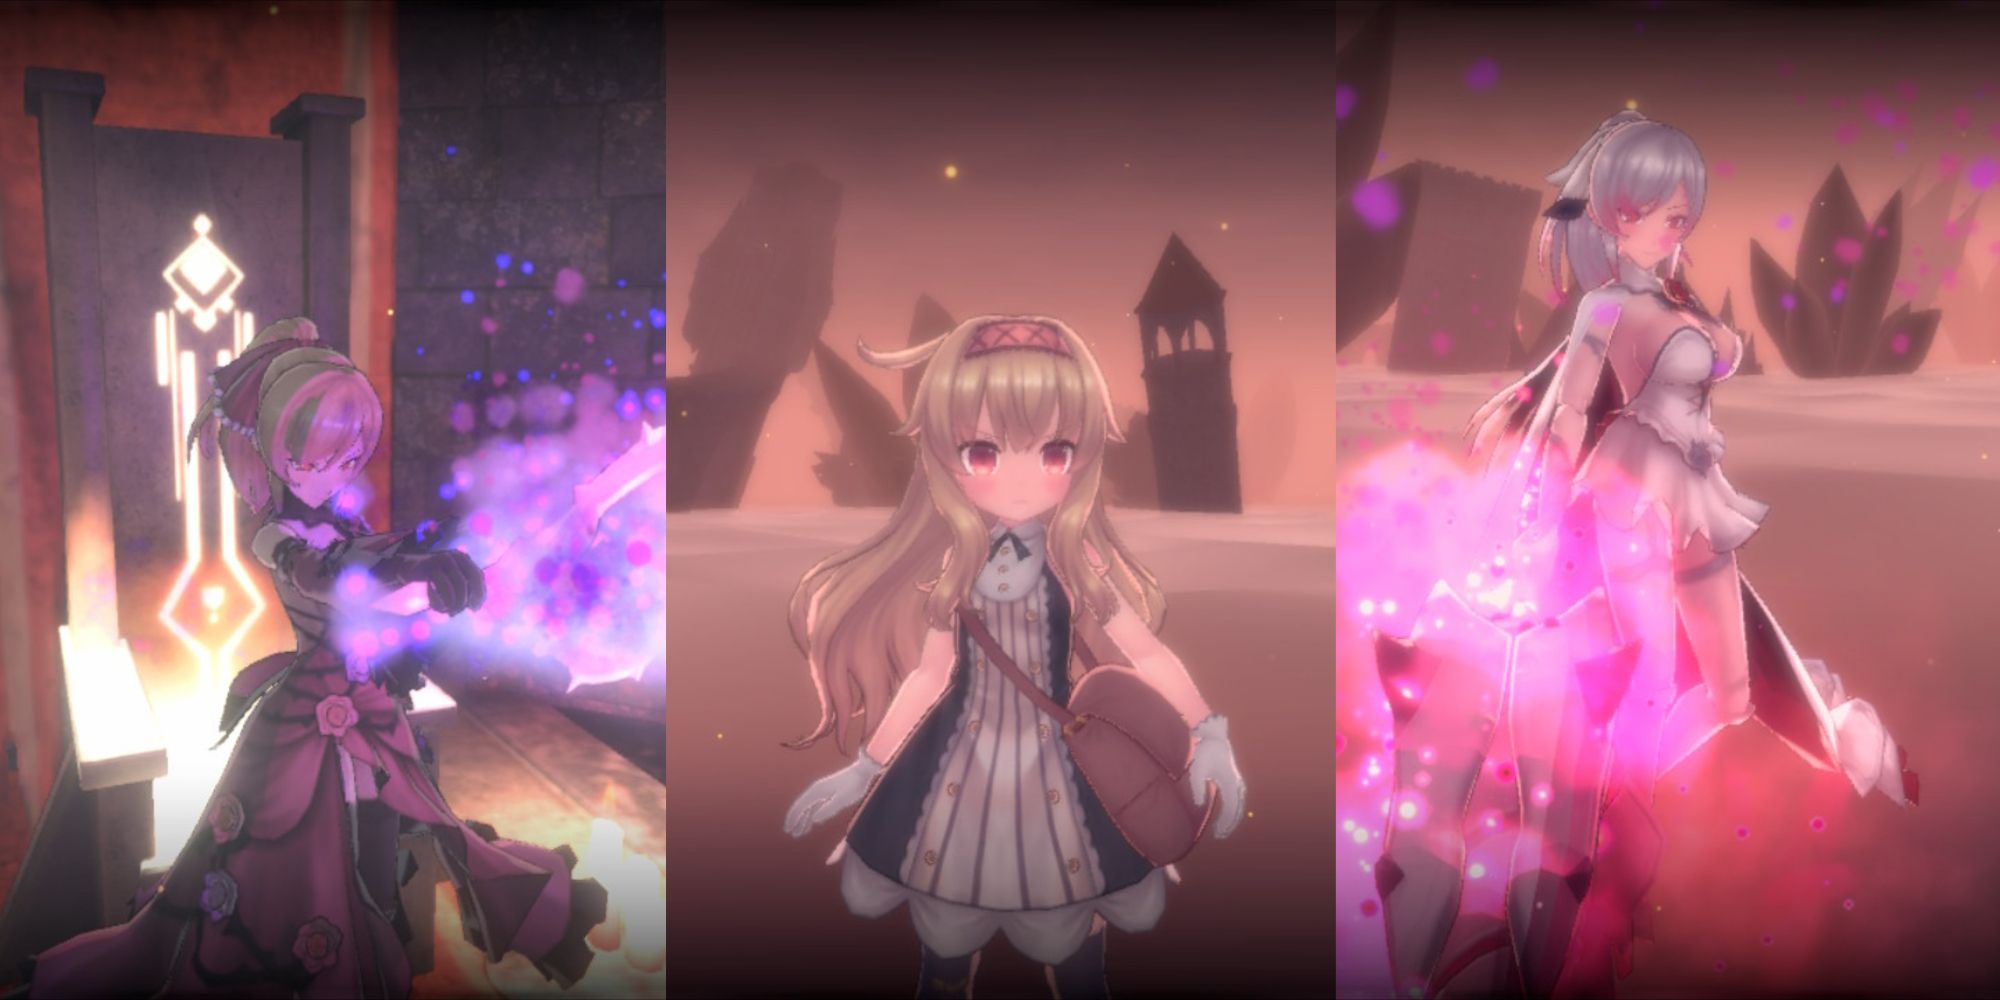 A collage of Vanessa before the two boss fights and Nobeta standing to fight them in Little Witch Nobeta.